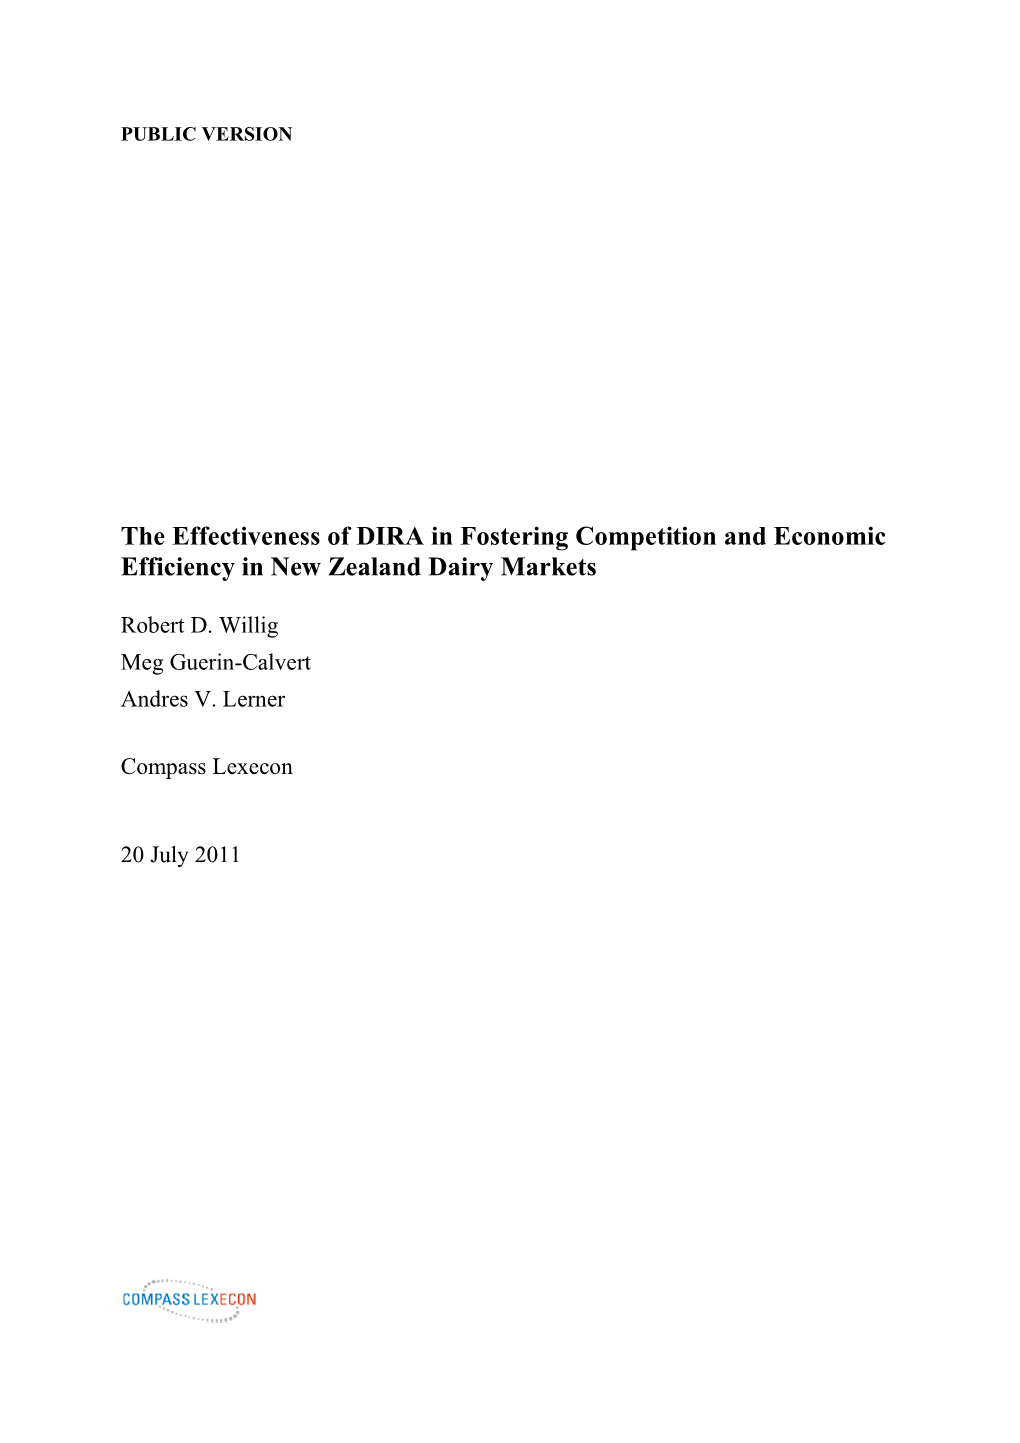 The Effectiveness of DIRA in Fostering Competition and Economic